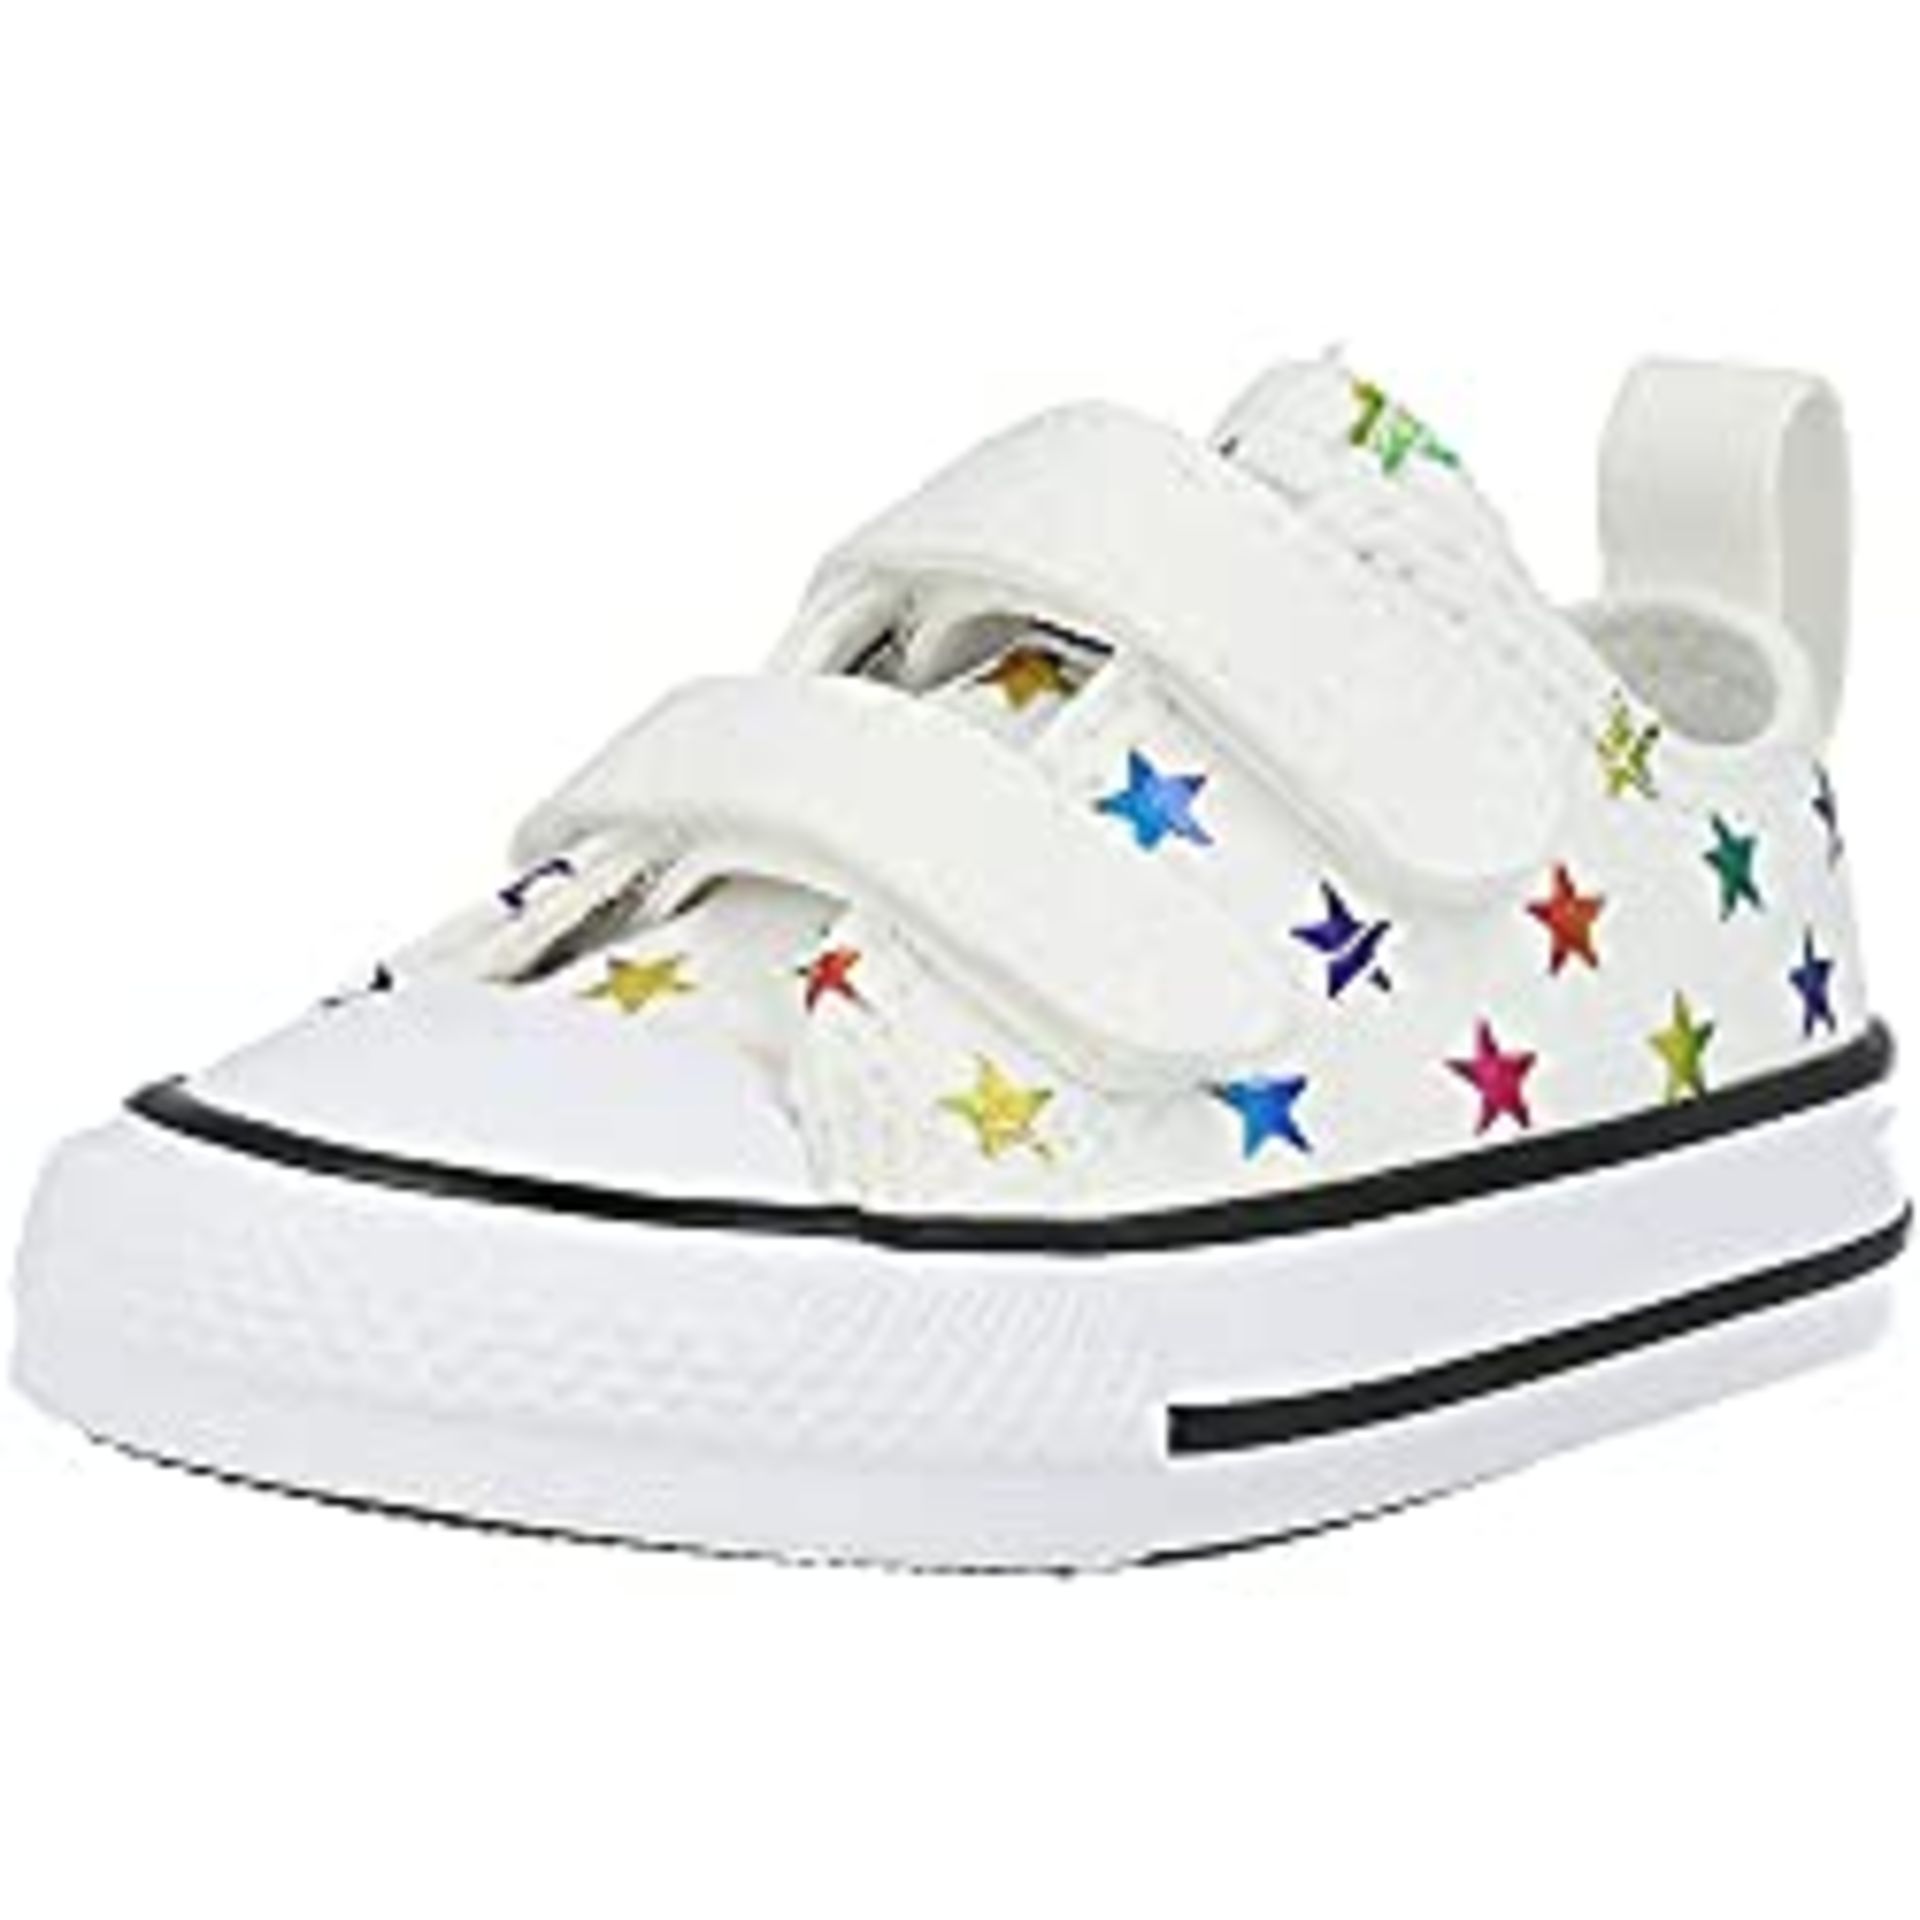 RRP £24.98 Converse All Star 2vlace Trainers White Black Bold Pink Gamer - 7 Infant UK